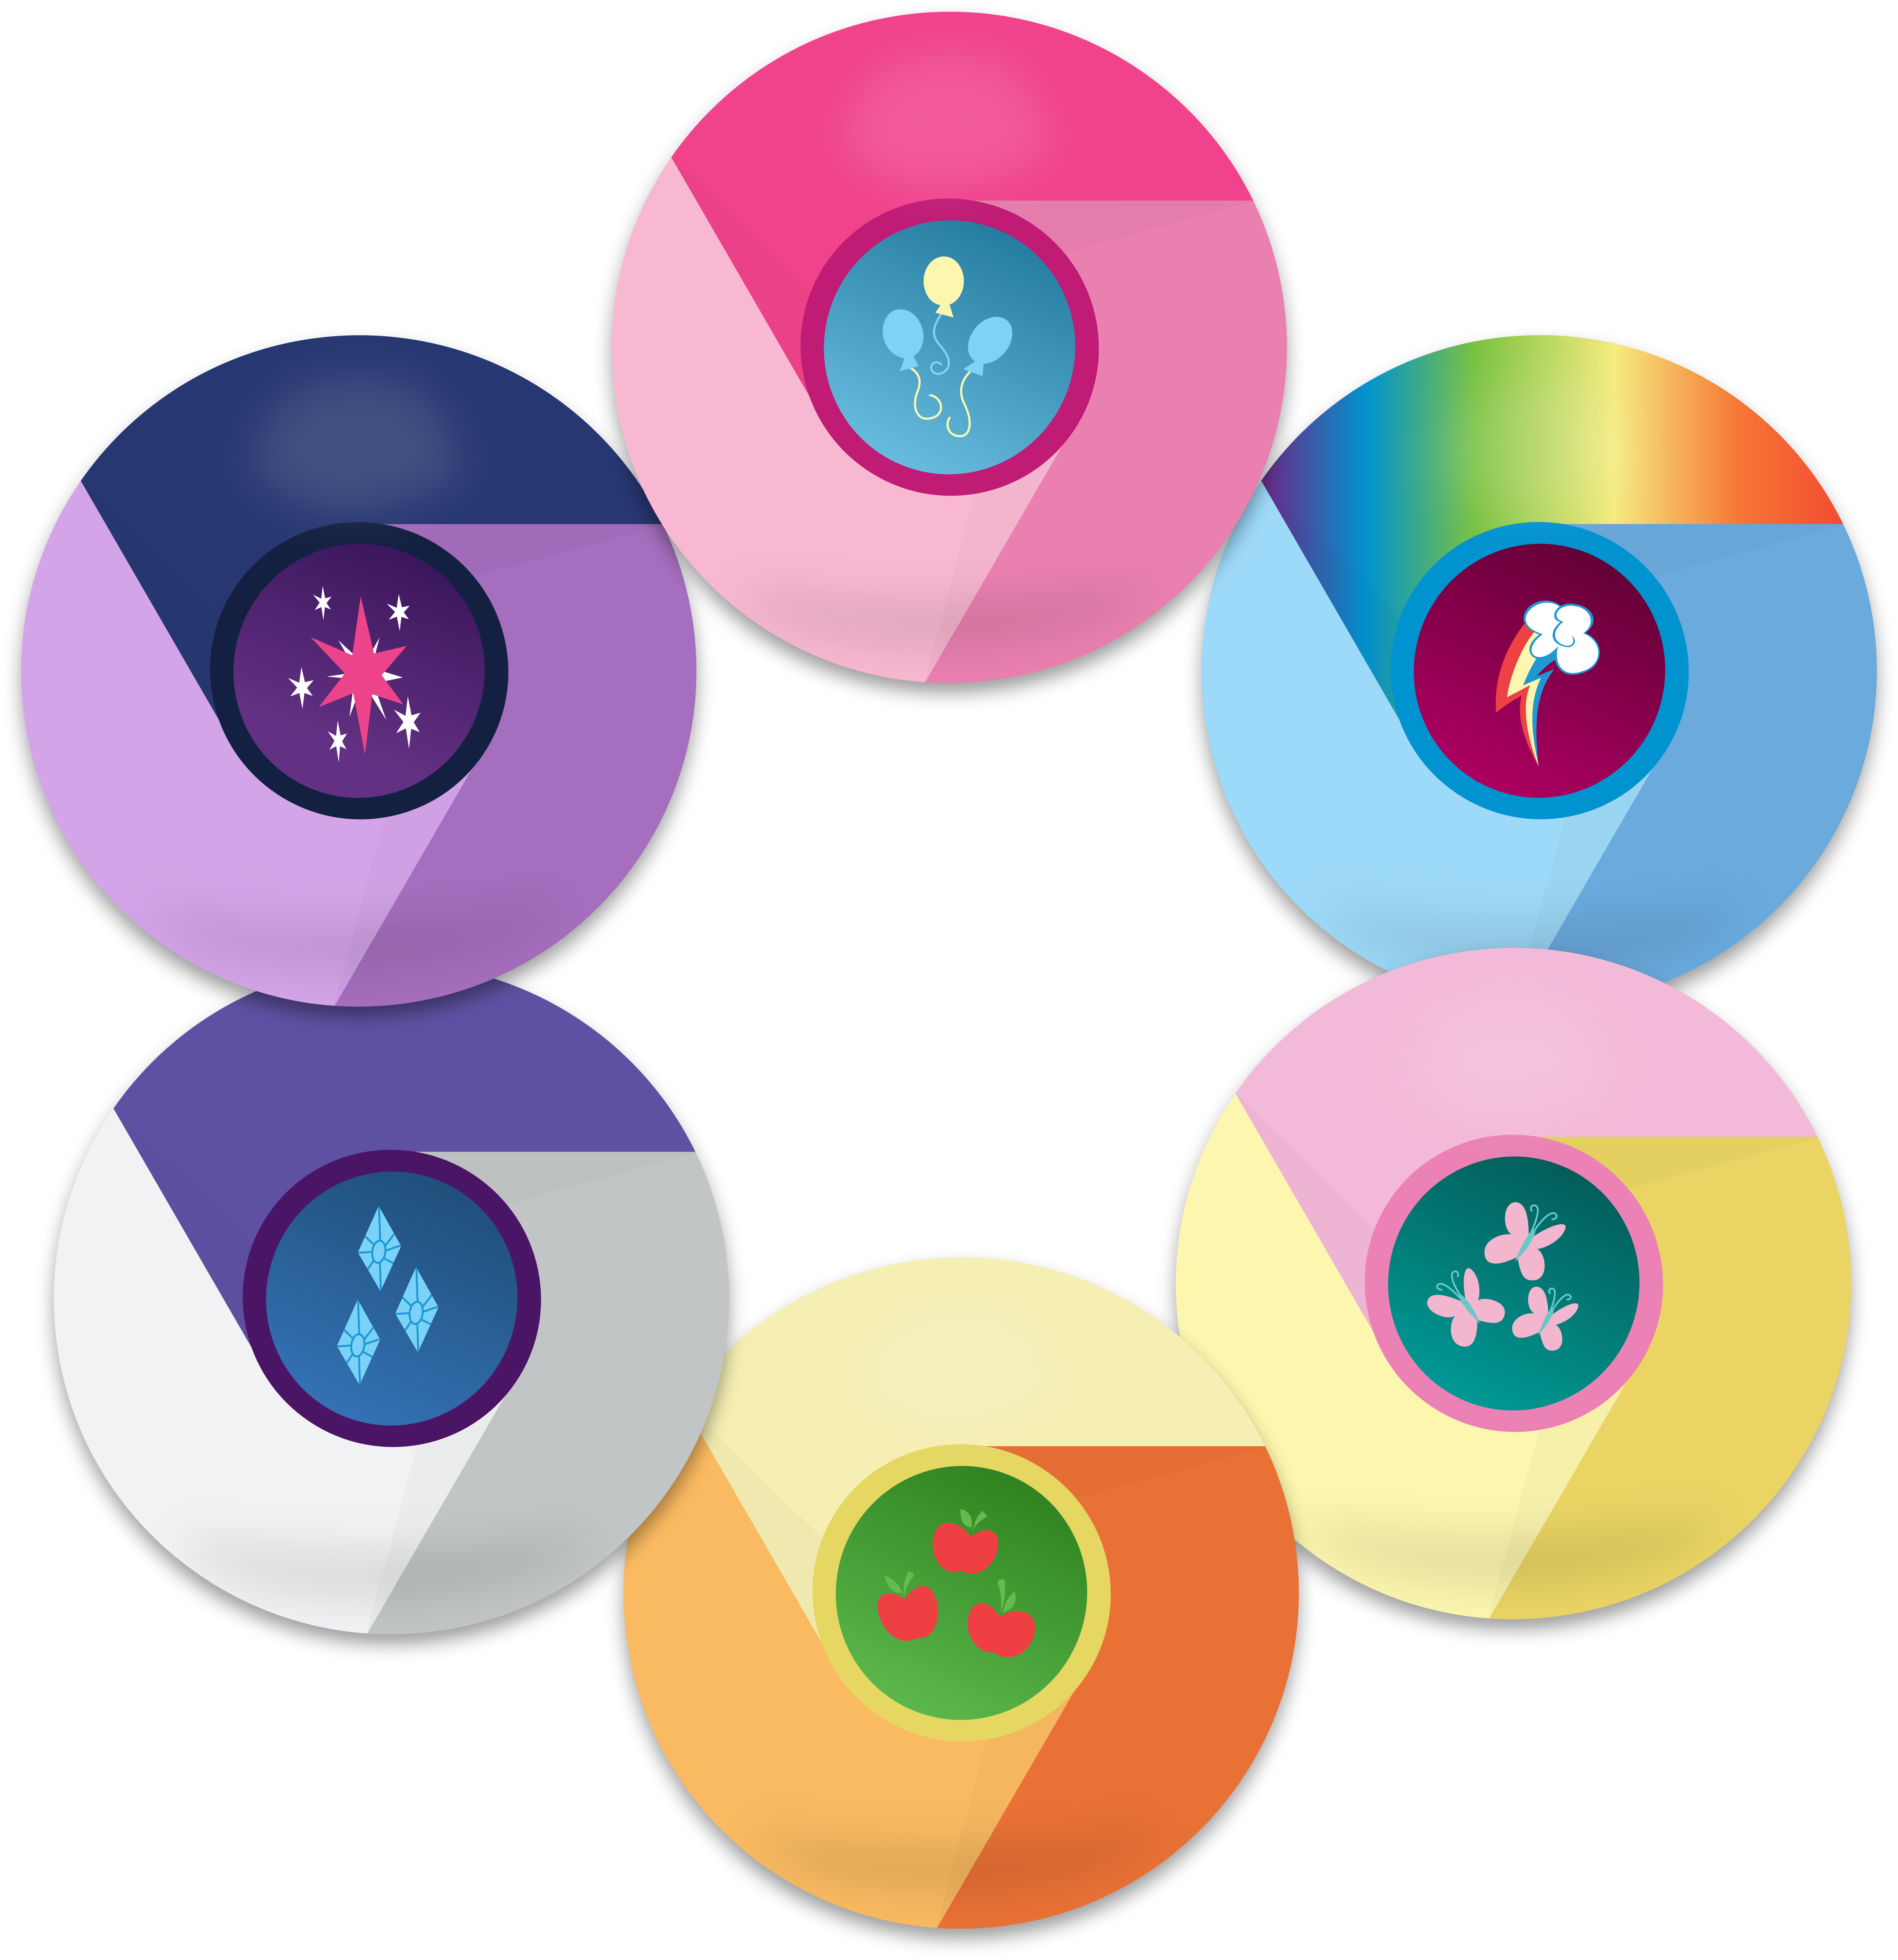 A Group Of Colorful Circles With Different Designs